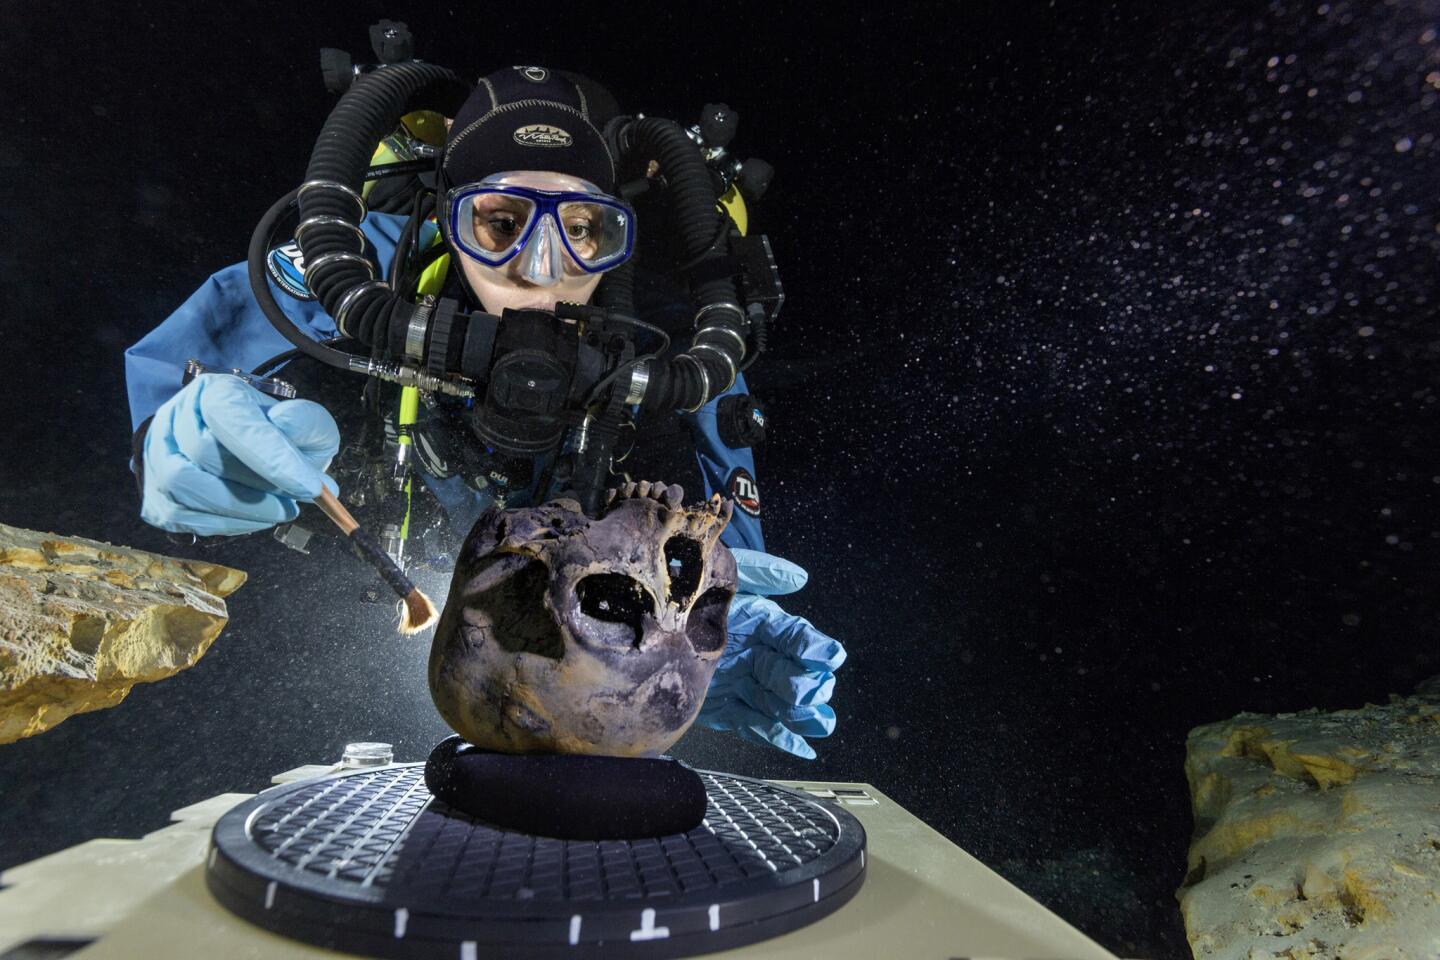 Diver Susan Bird works at the bottom of Hoyo Negro, a large dome-shaped underwater cave on Mexico's Yucatán Peninsula. She carefully brushes the human skull found at the site while her team members take detailed photographs.